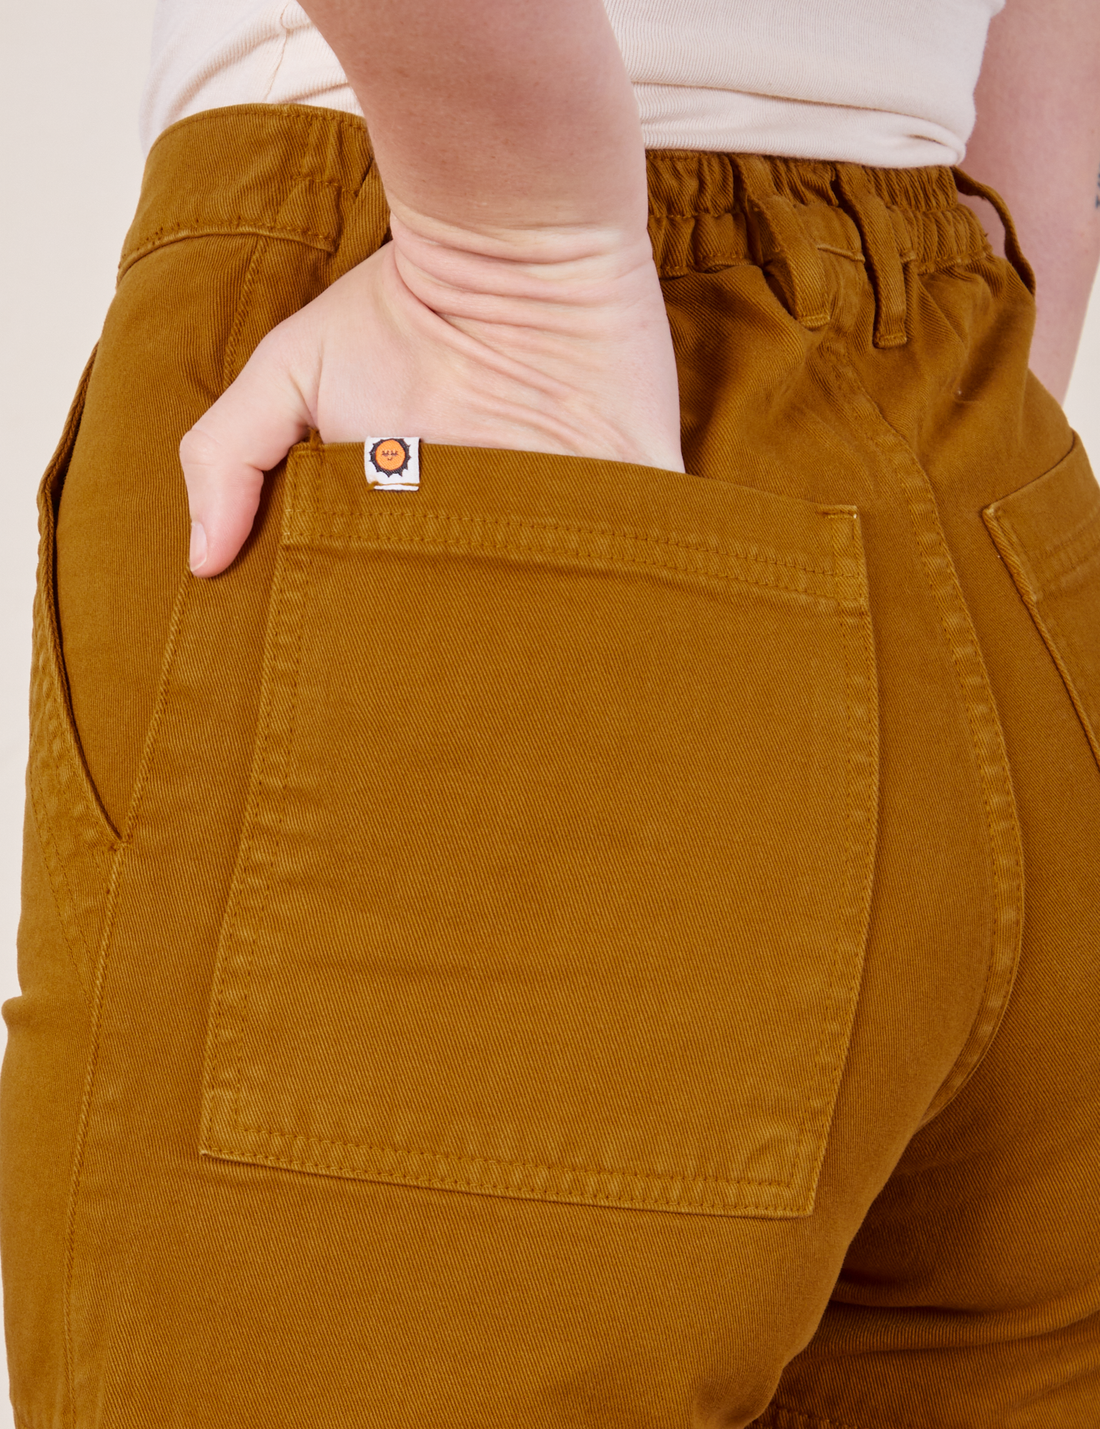 Classic Work Shorts in Spicy Mustard back pocket close up. Alex has her hand in the back pocket.